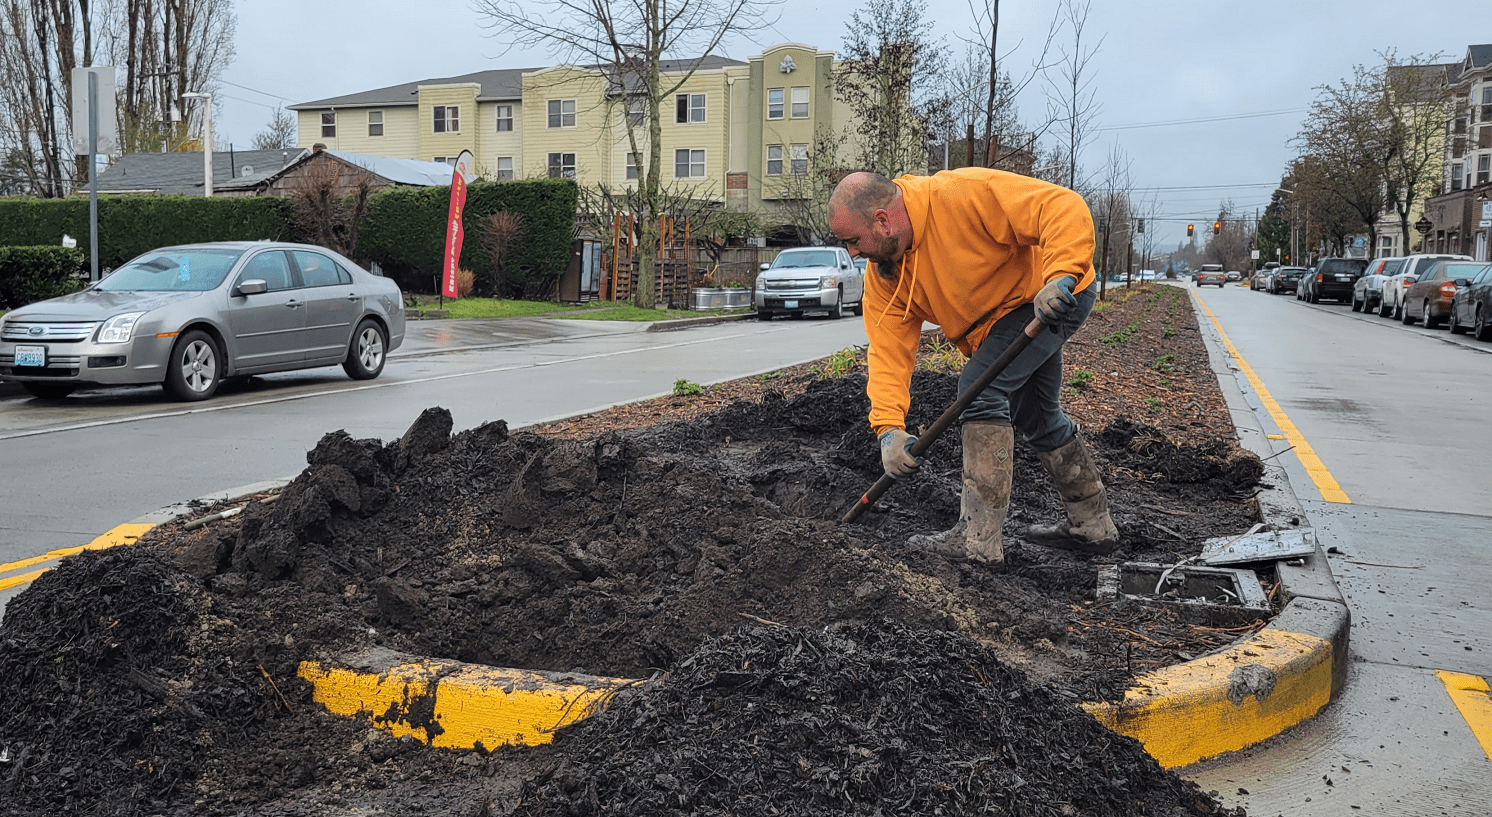 A man wearing an orange sweatshirt works using a shovel in the center median of Delridge Way SW. Cars and buildings, as well as travel lanes, are visible in the background.